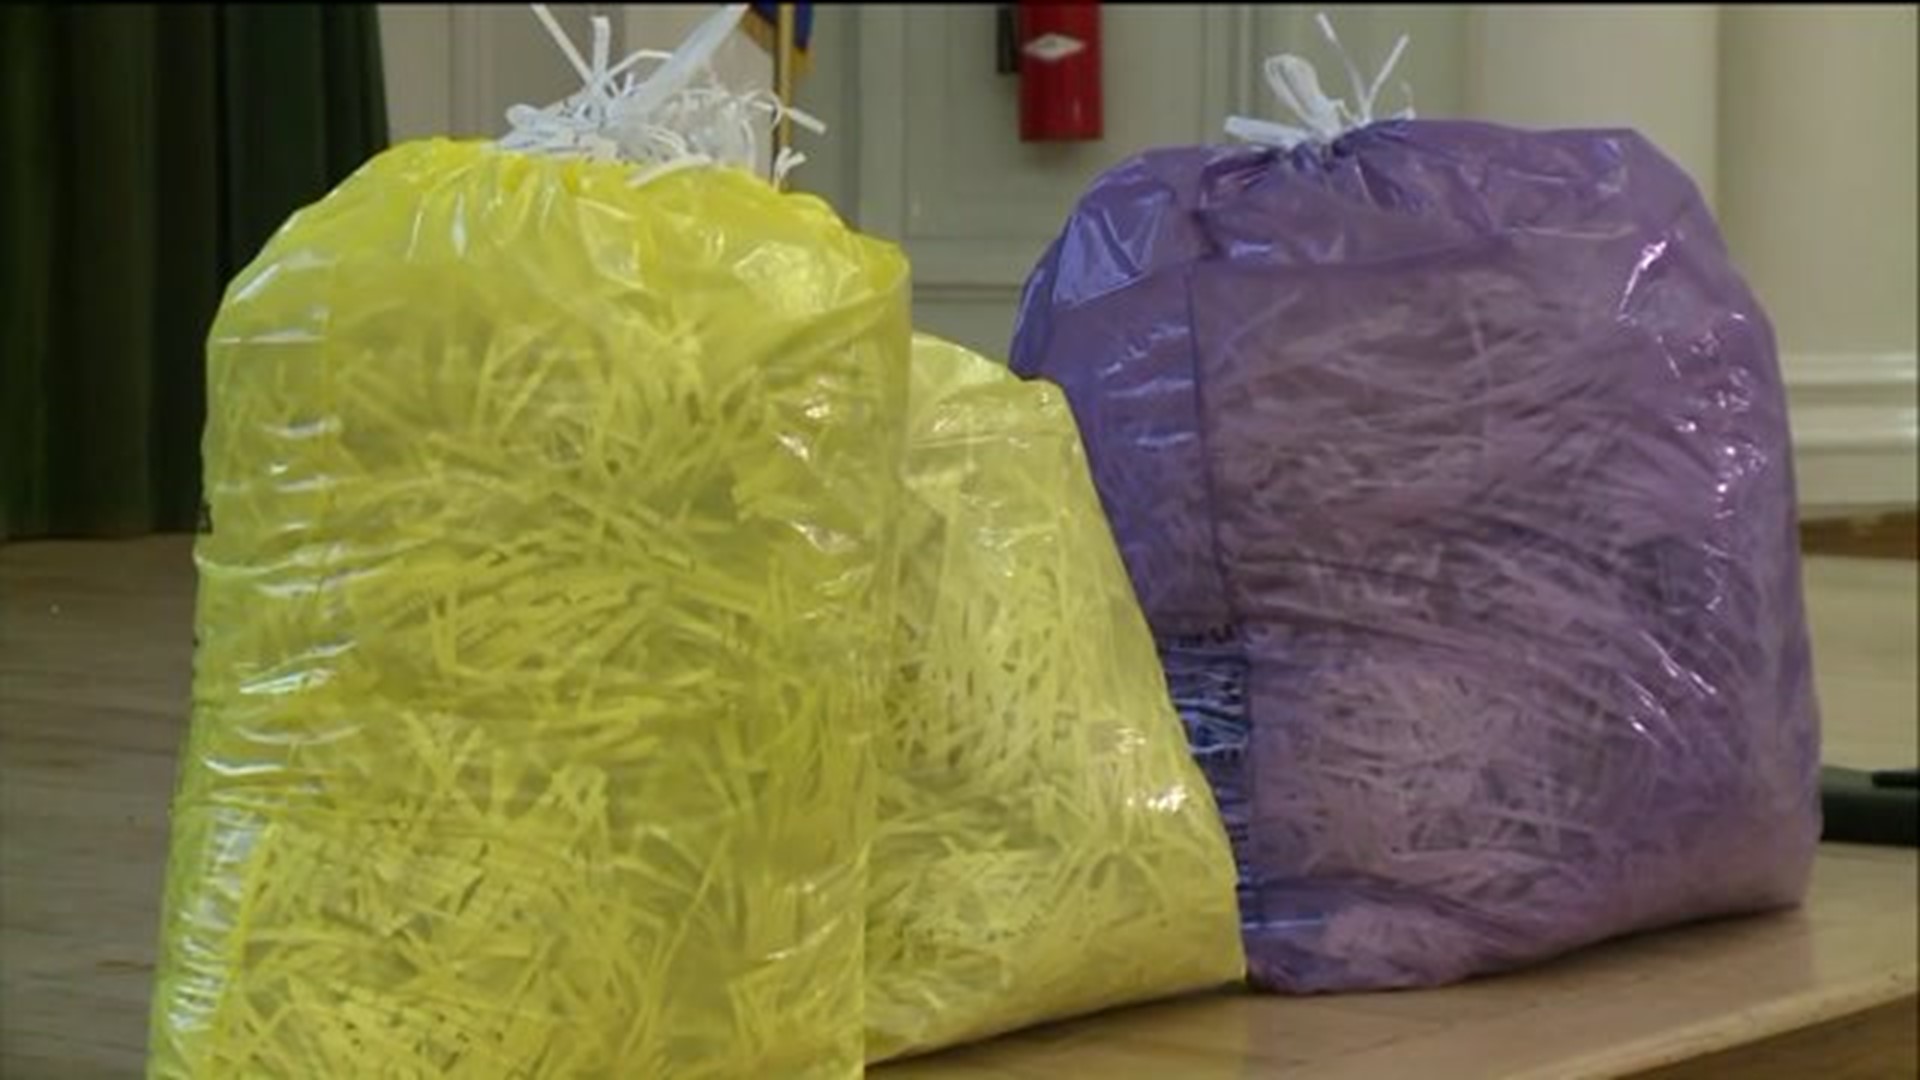 Trash day in West Hartford could see some big changes